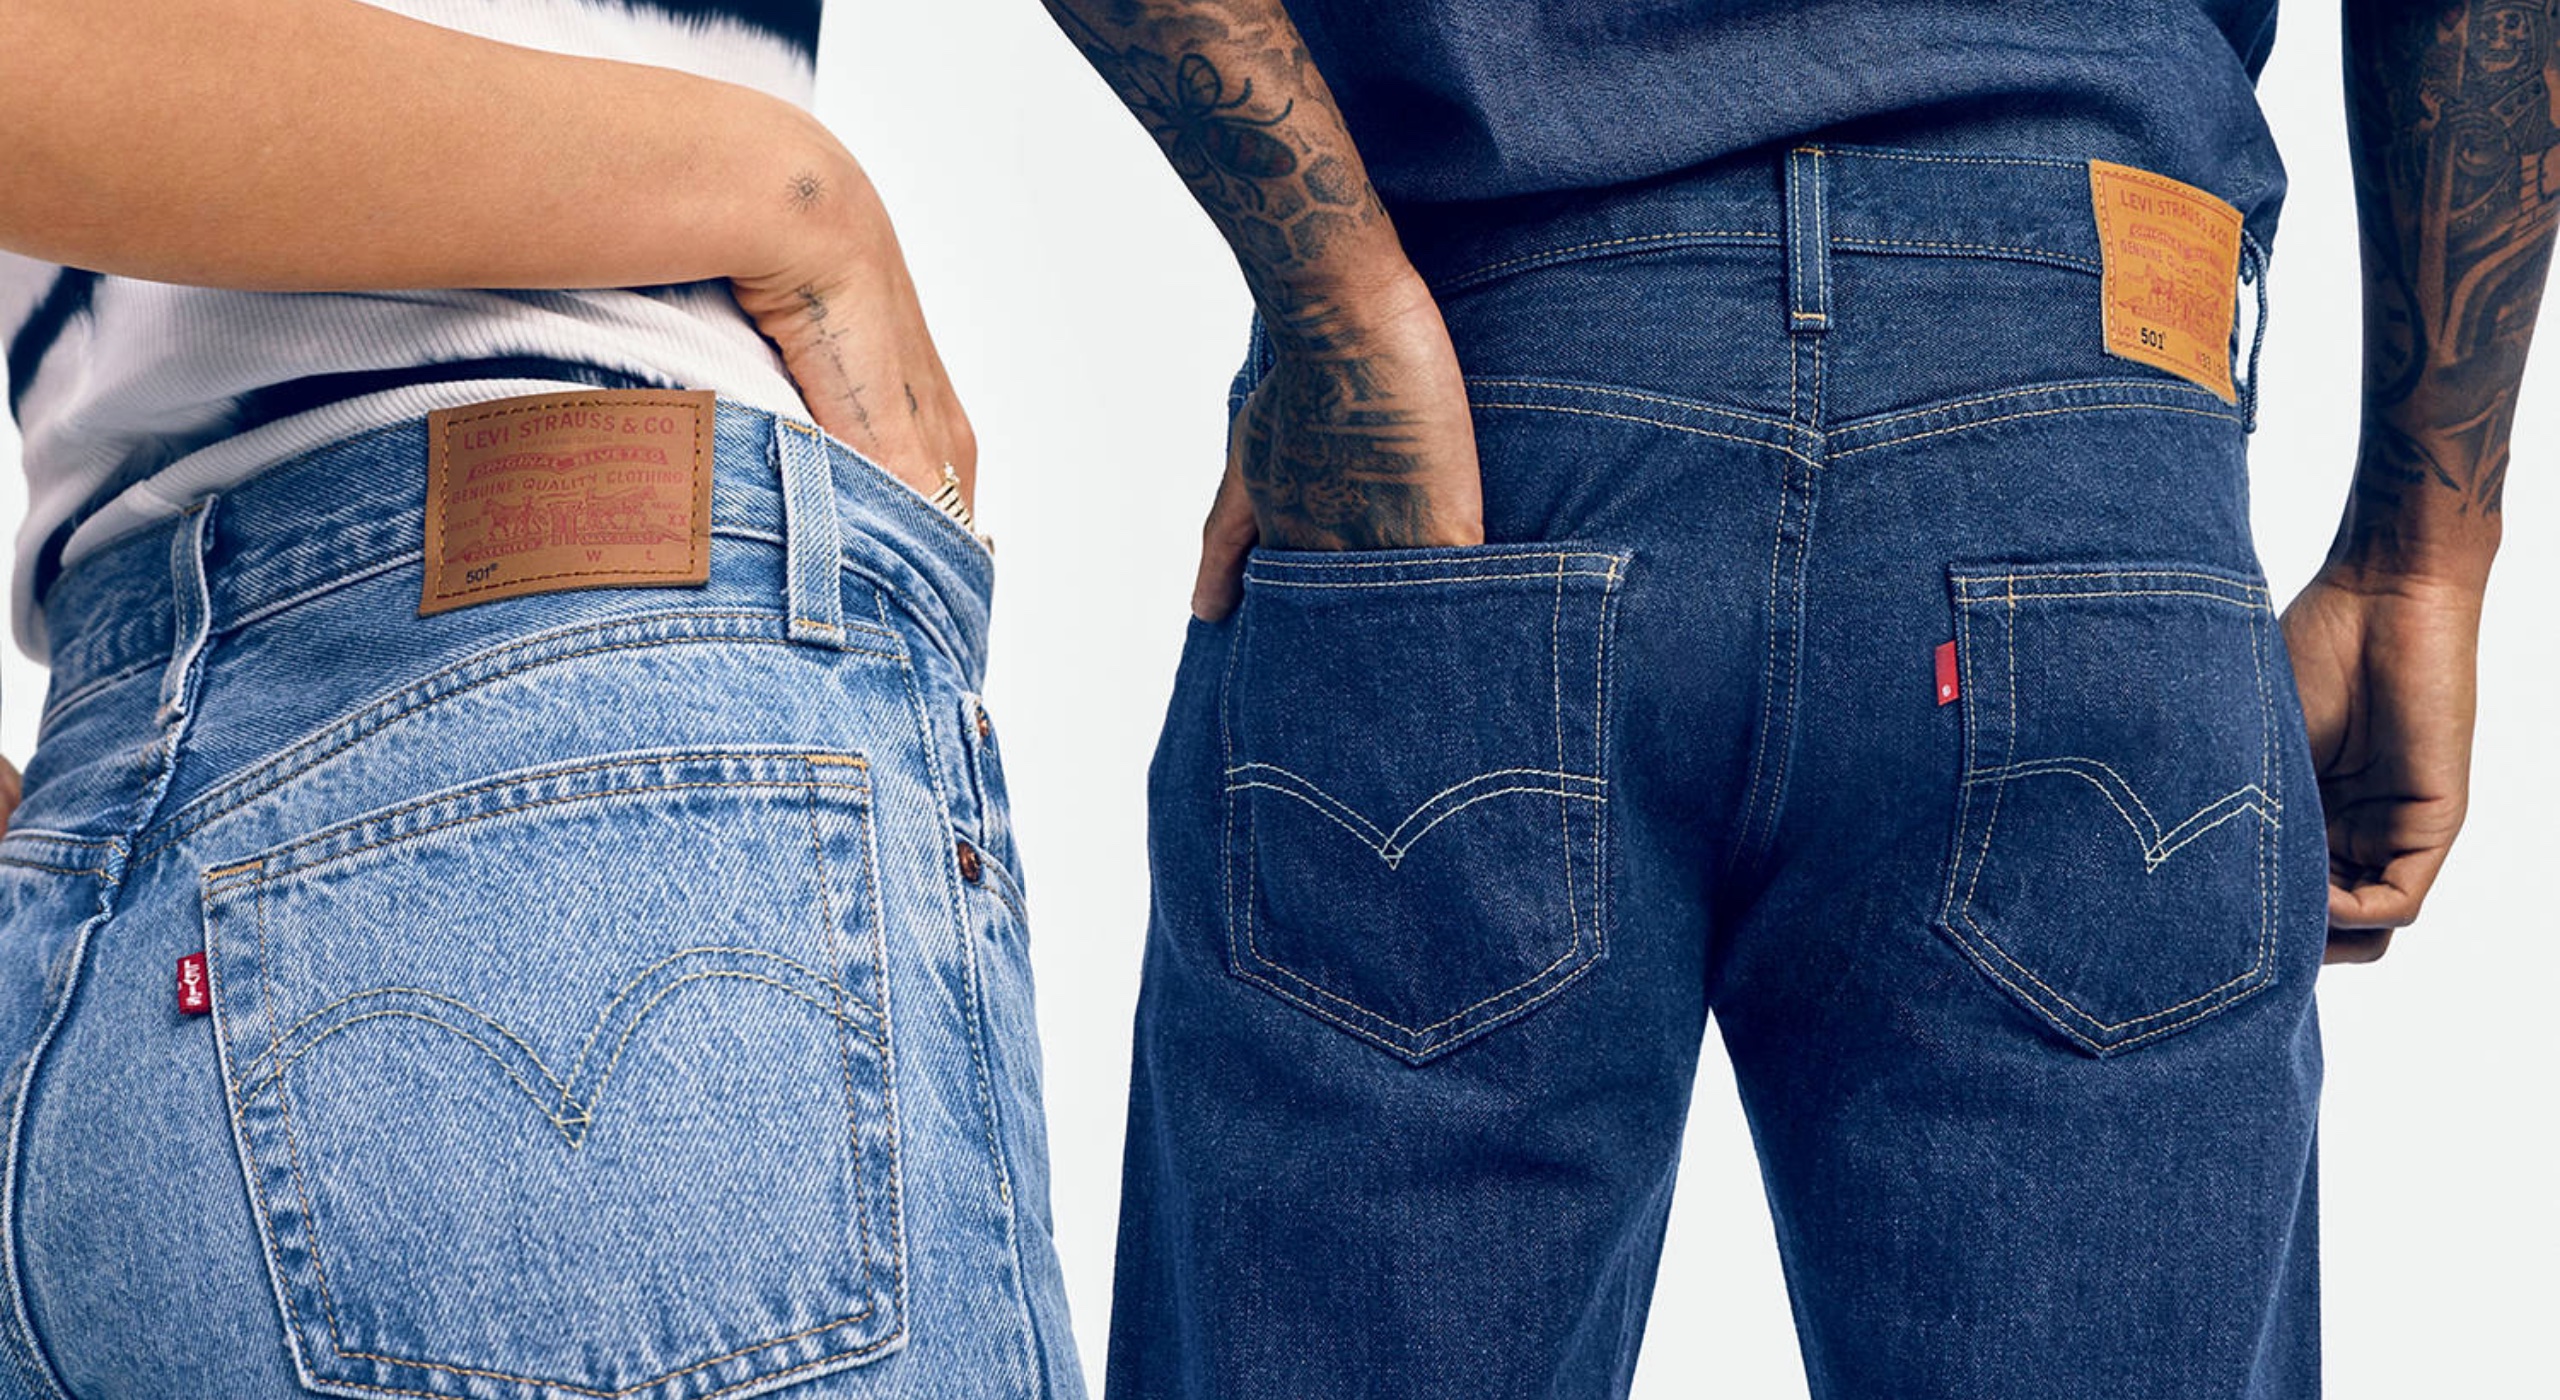 Levi's Friends and Family Sale offers 30% off sitewide + extra 40% off  clearance items